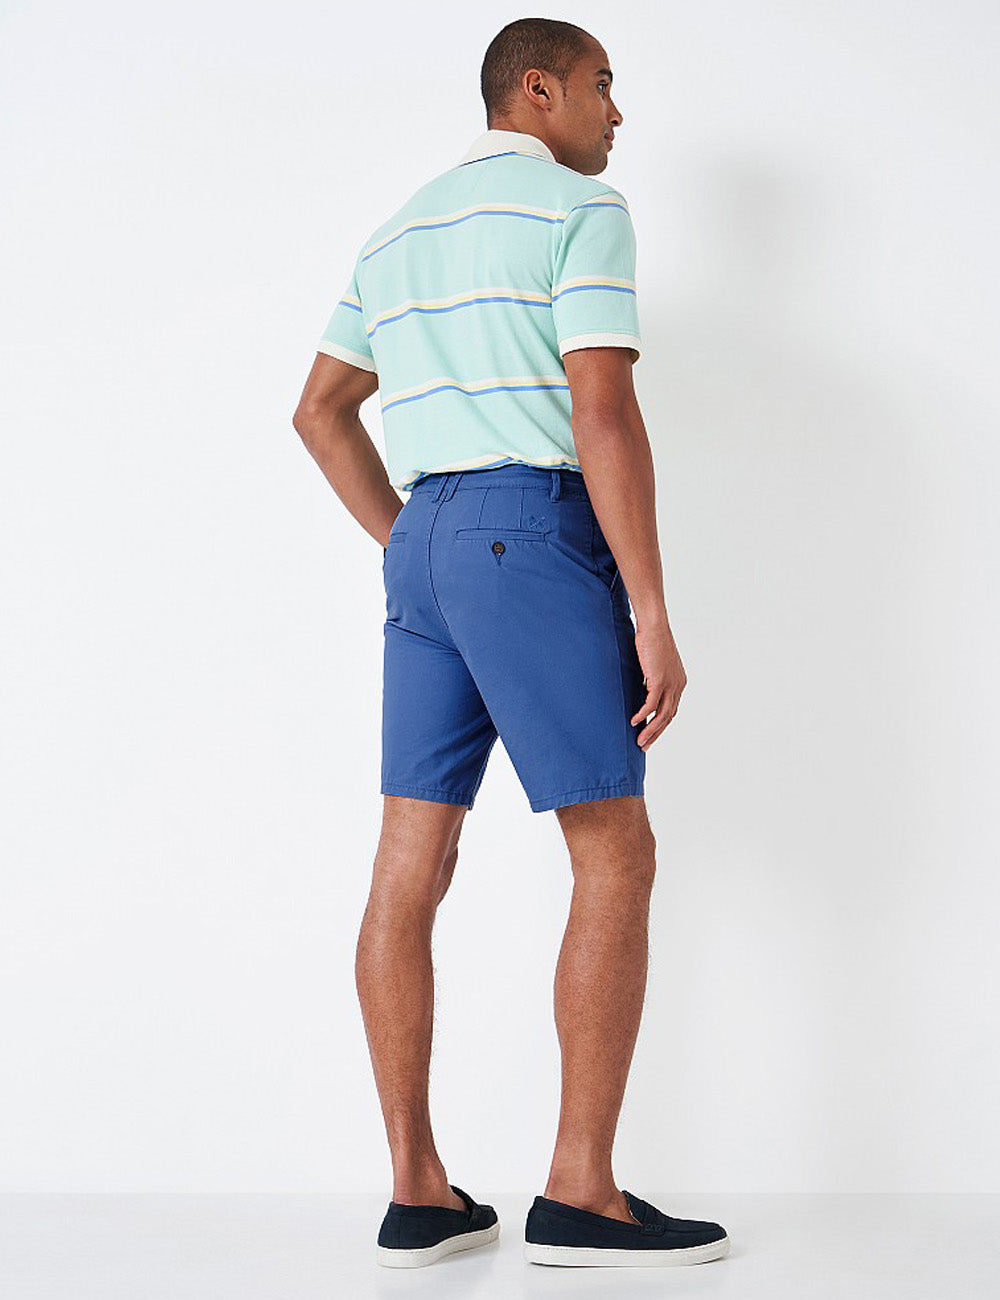 Man wearing the Bermuda Shorts with a polo shirt tucked in, facing away